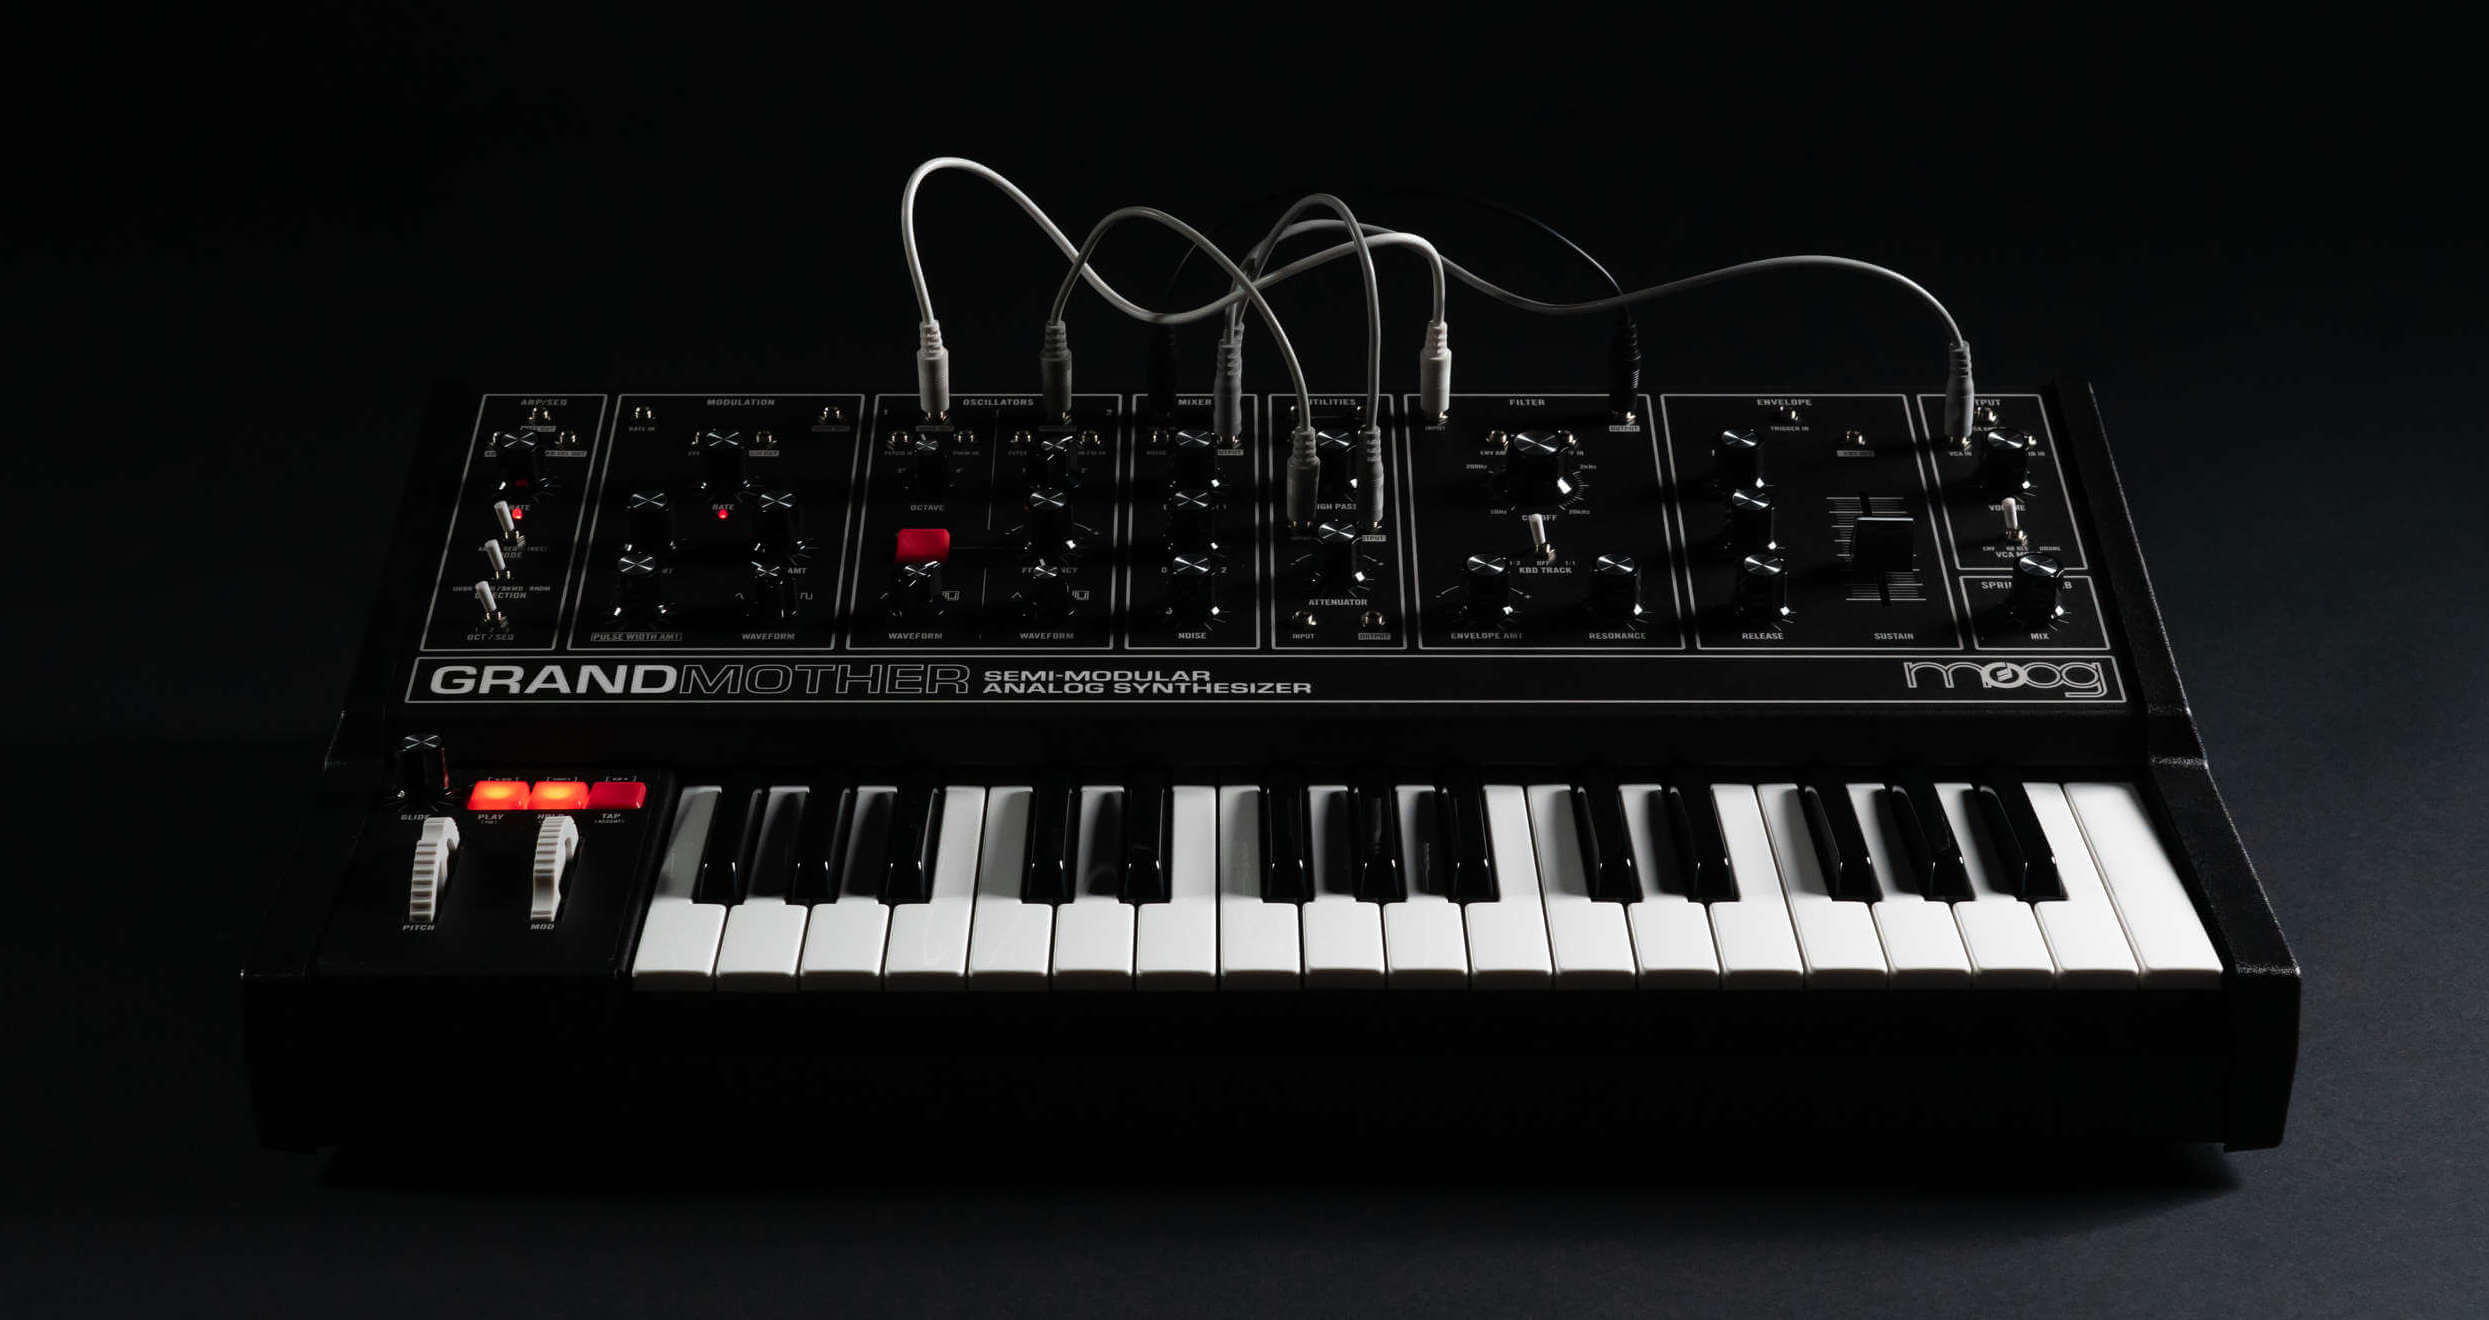 Ambient Sound Design With A Moog Grandmother - Attack Magazine